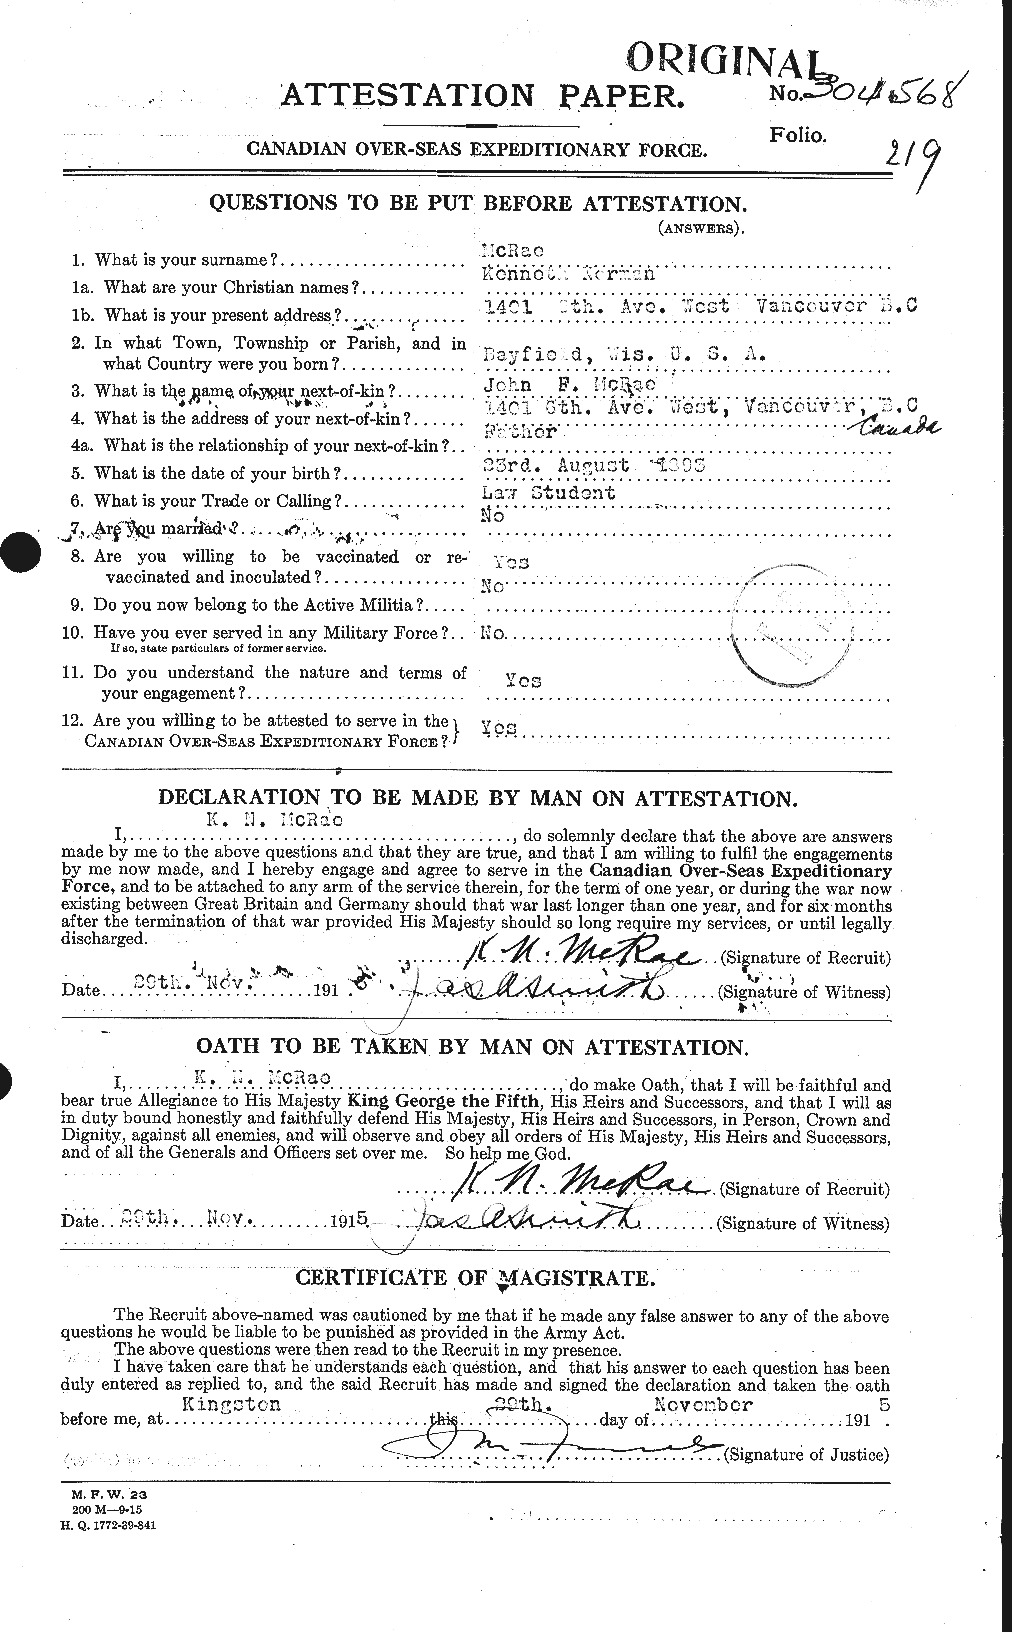 Personnel Records of the First World War - CEF 542863a